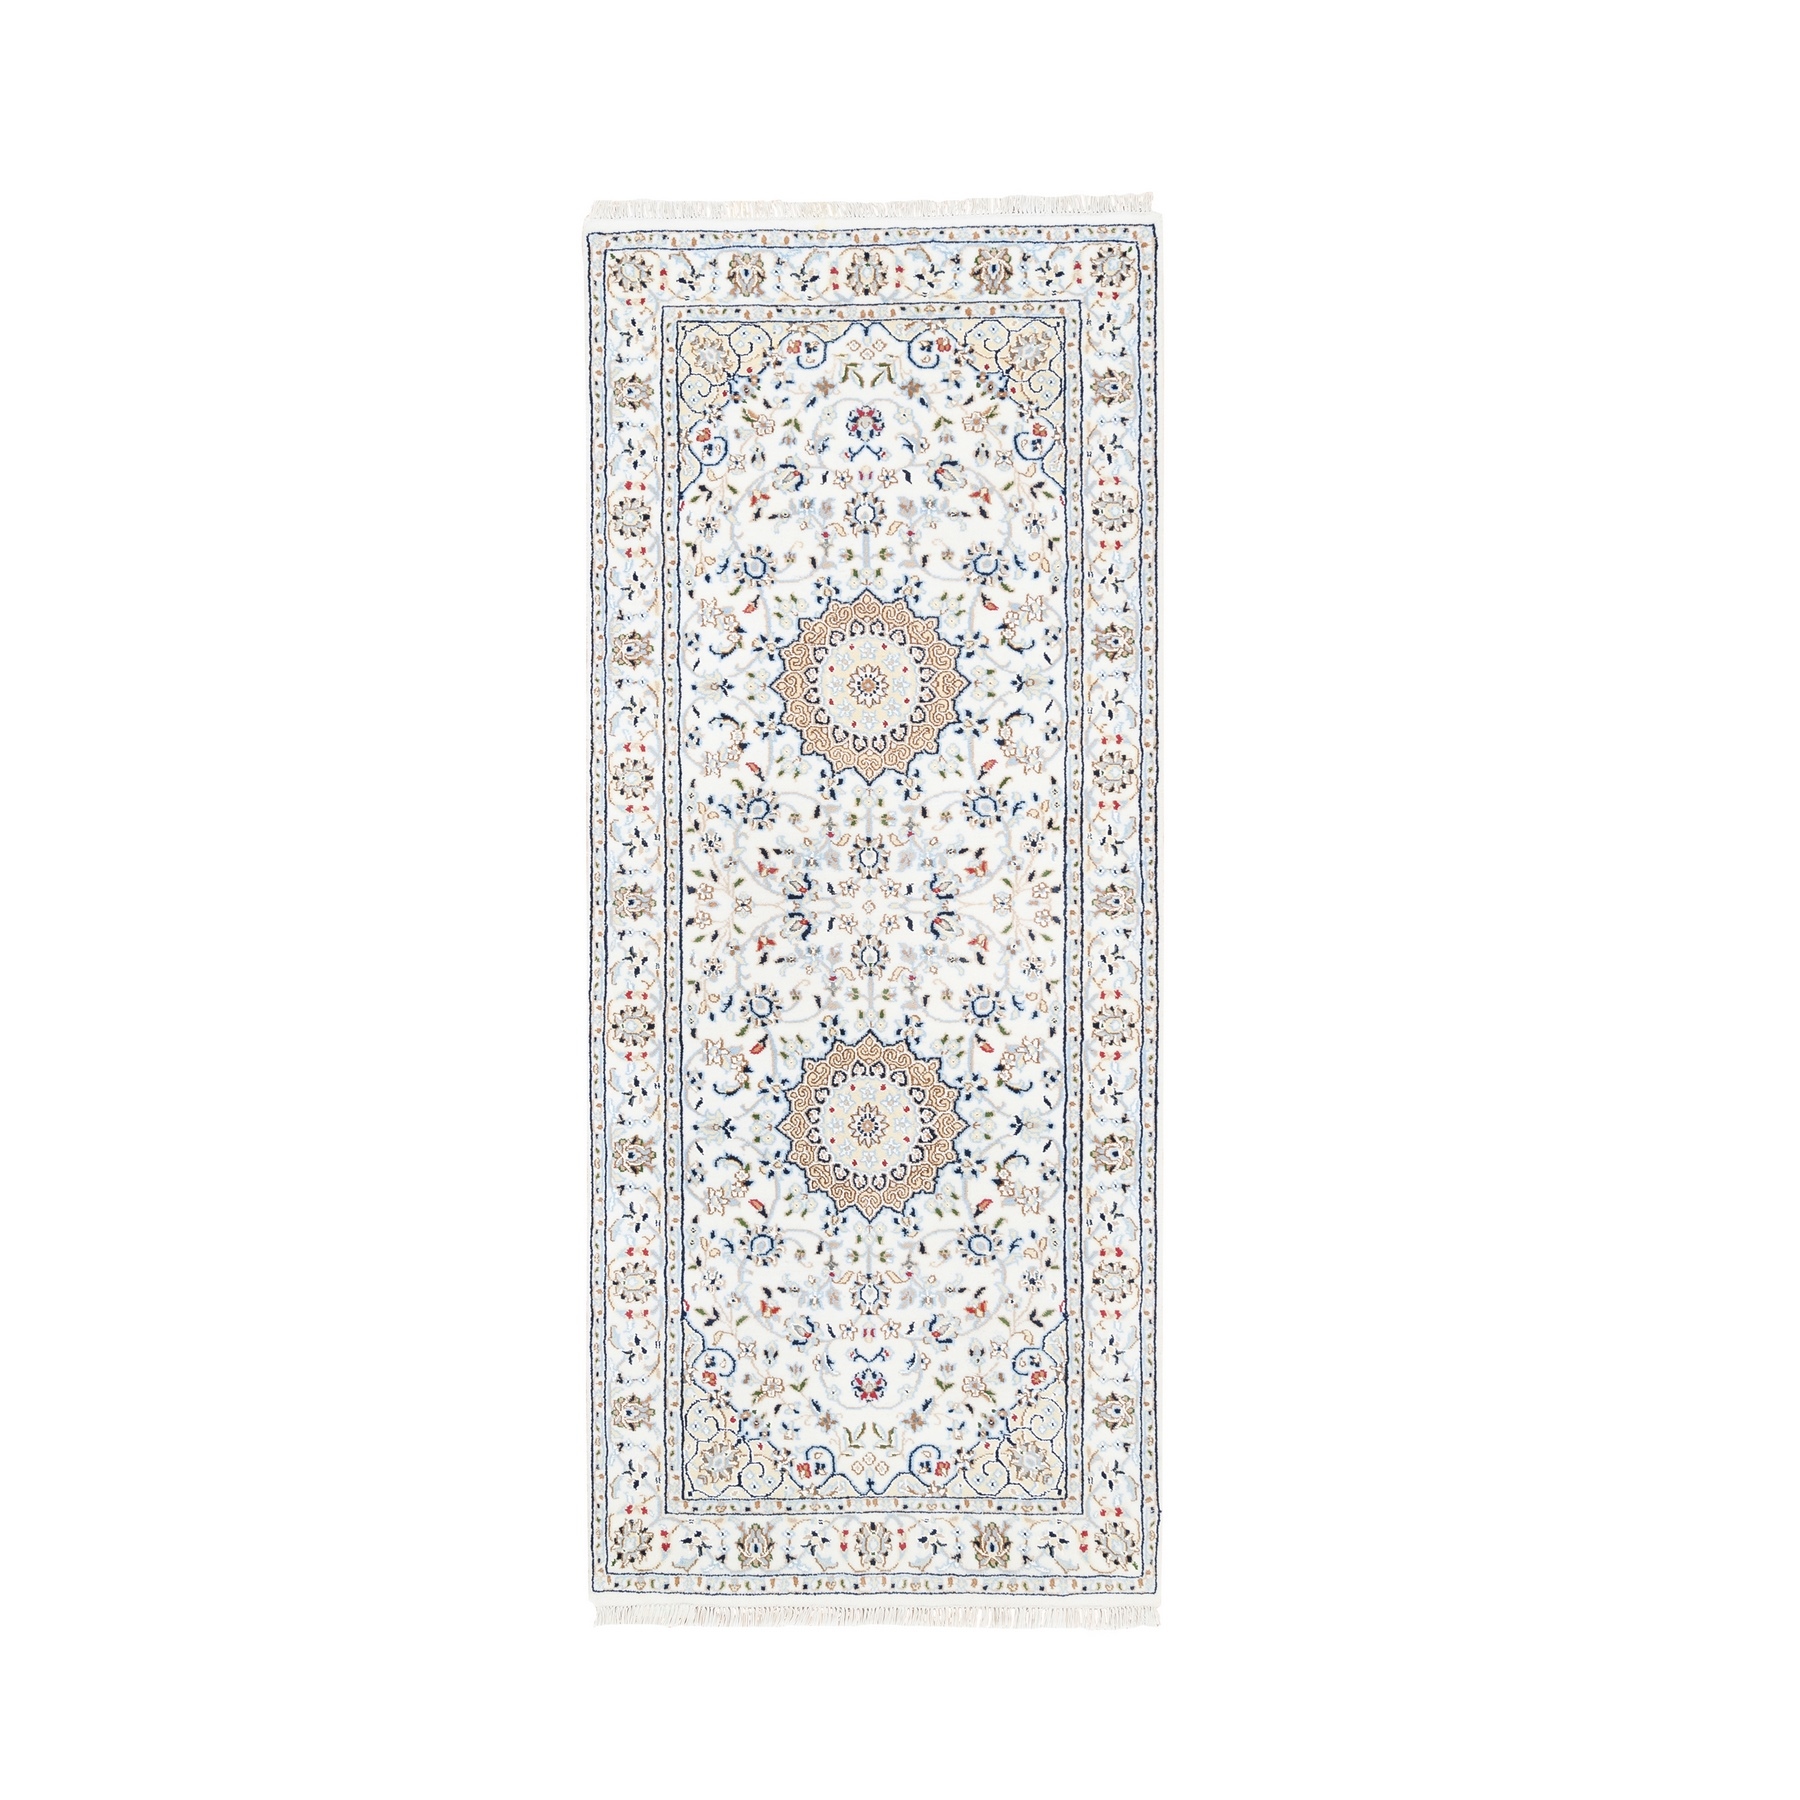 Pirniakan Collection Hand Knotted Ivory Rug No: 1125562